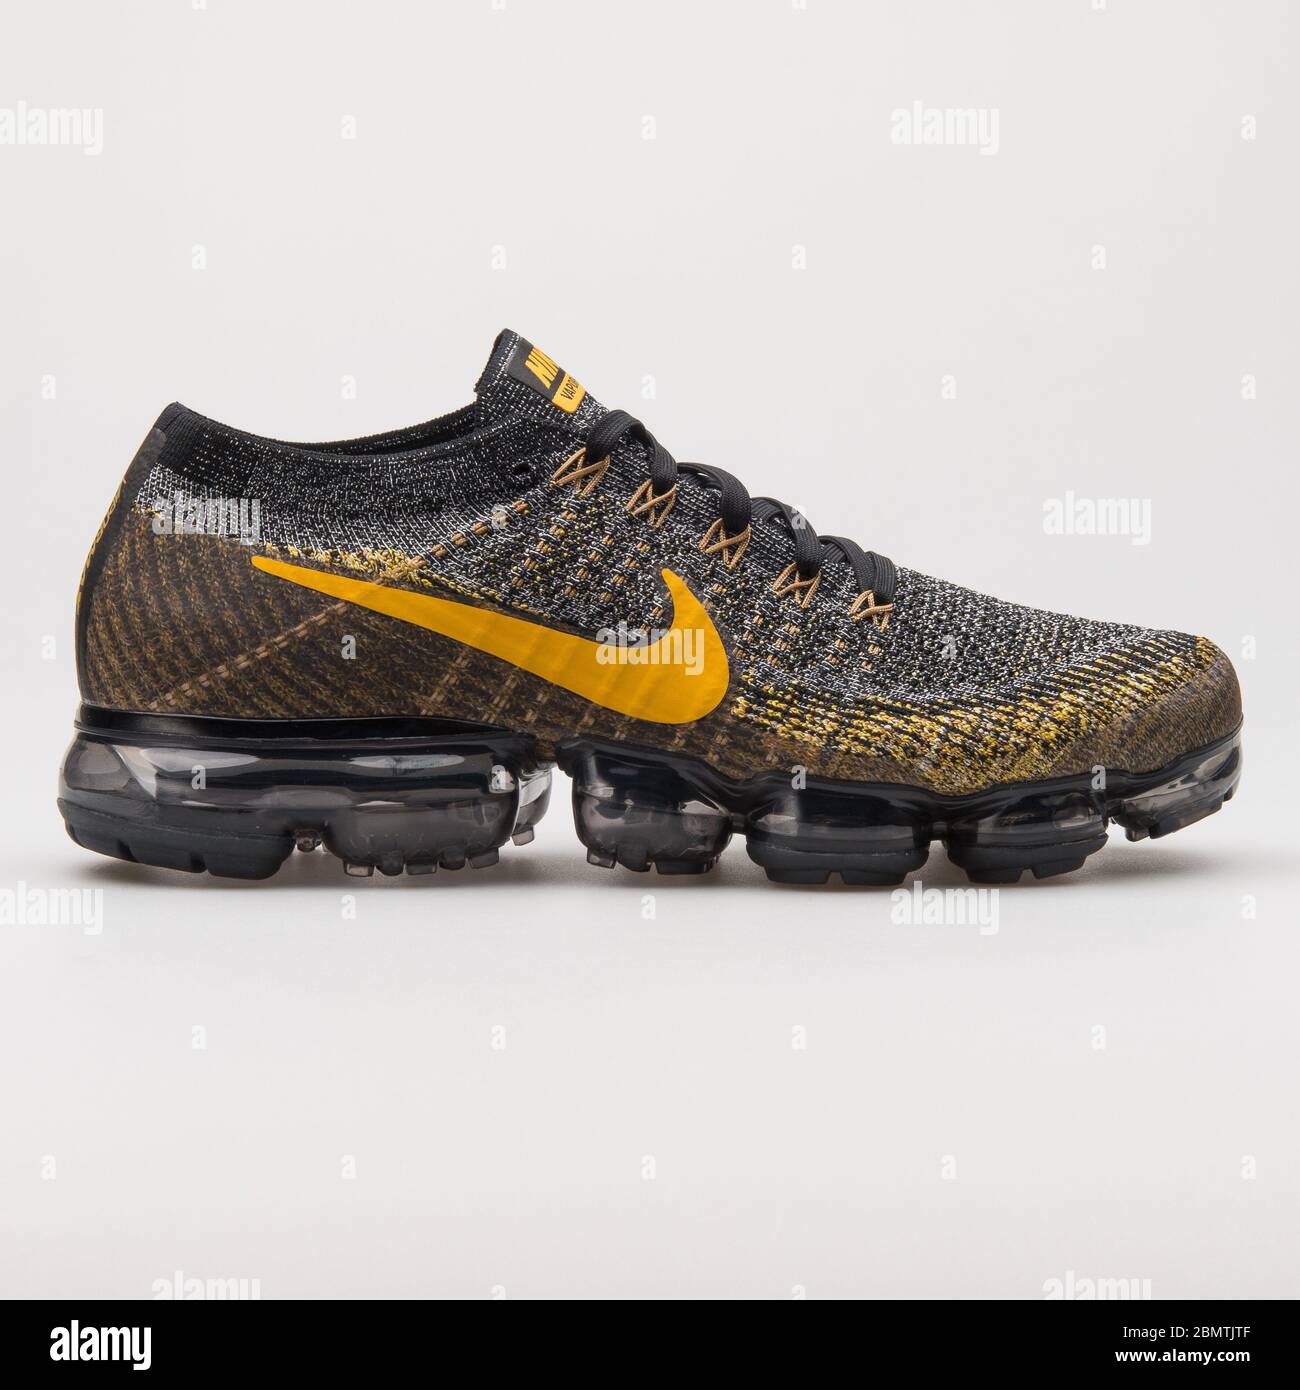 Vapormax High Resolution Stock Photography and Images - Alamy